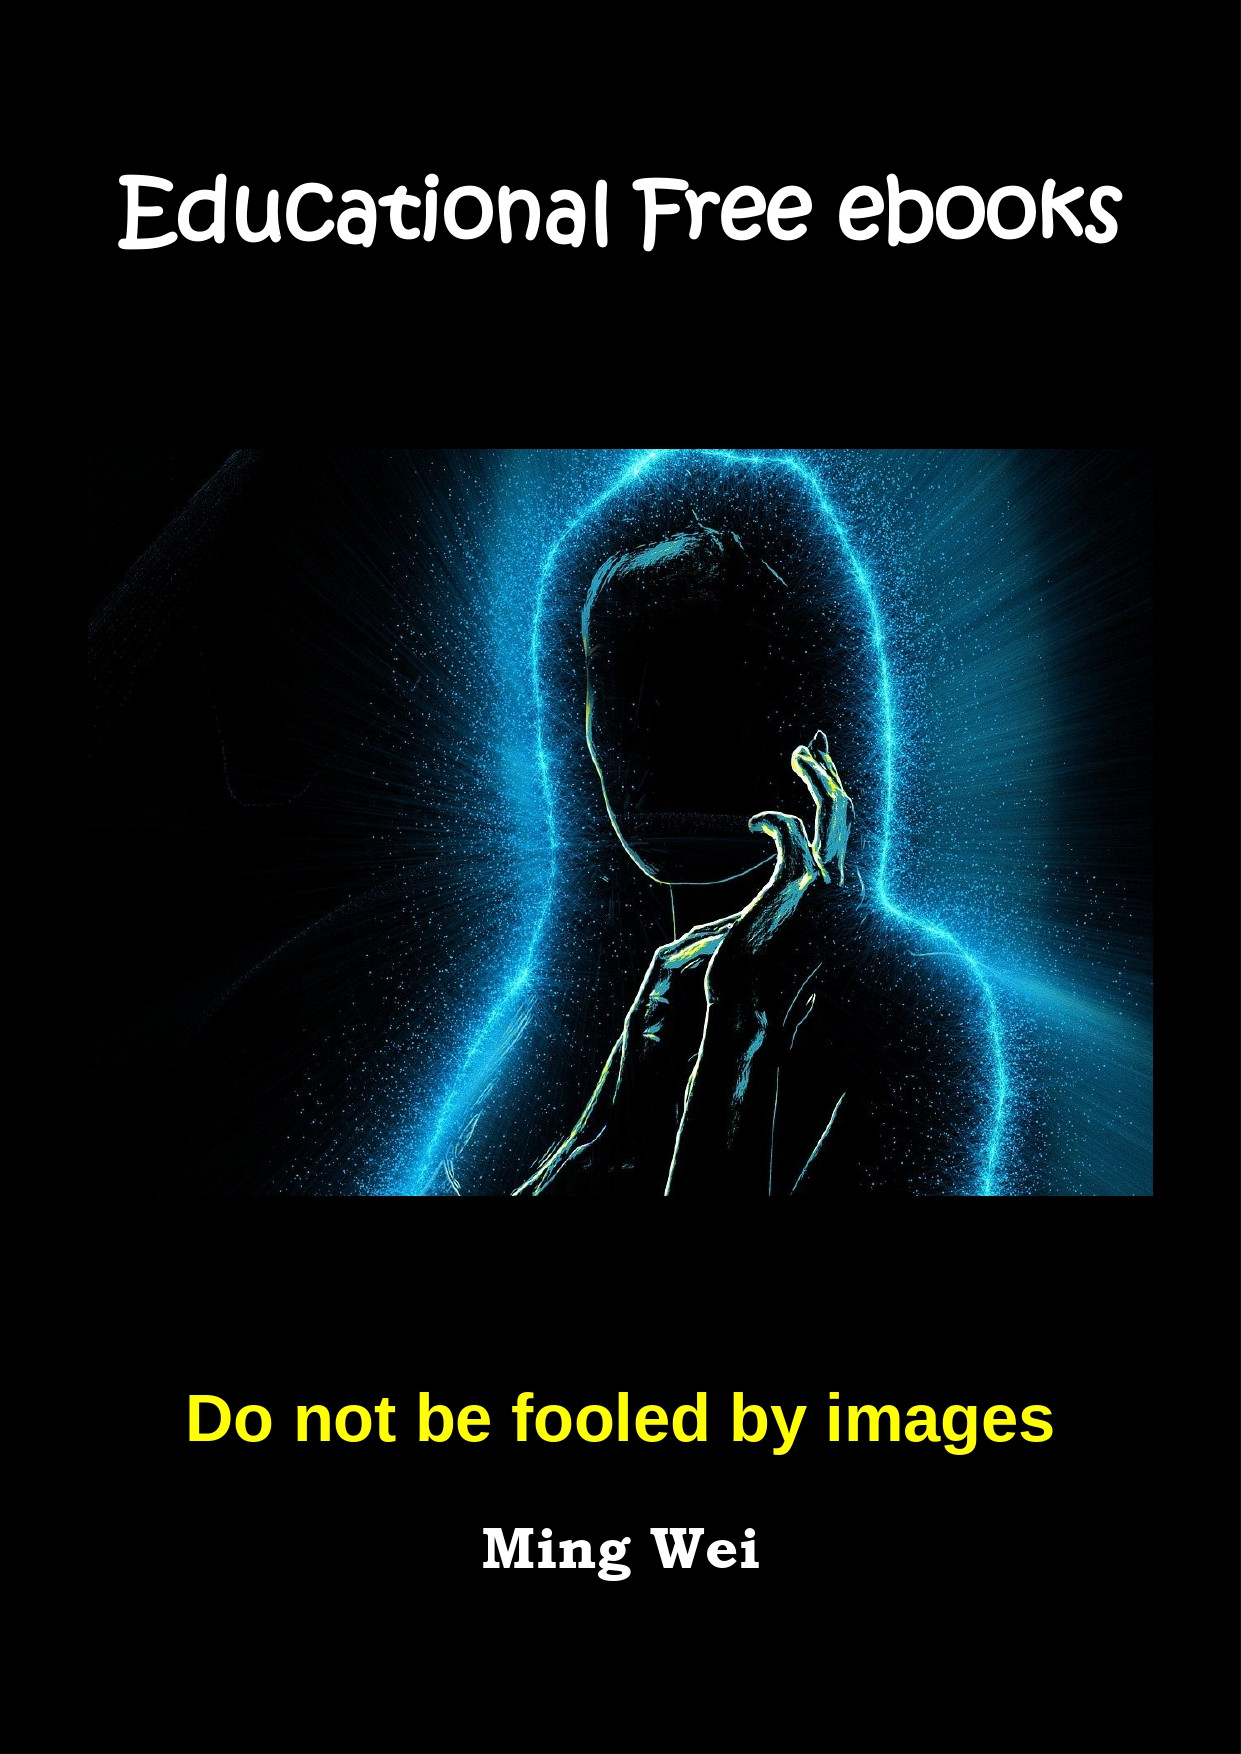 Do not be fooled by images